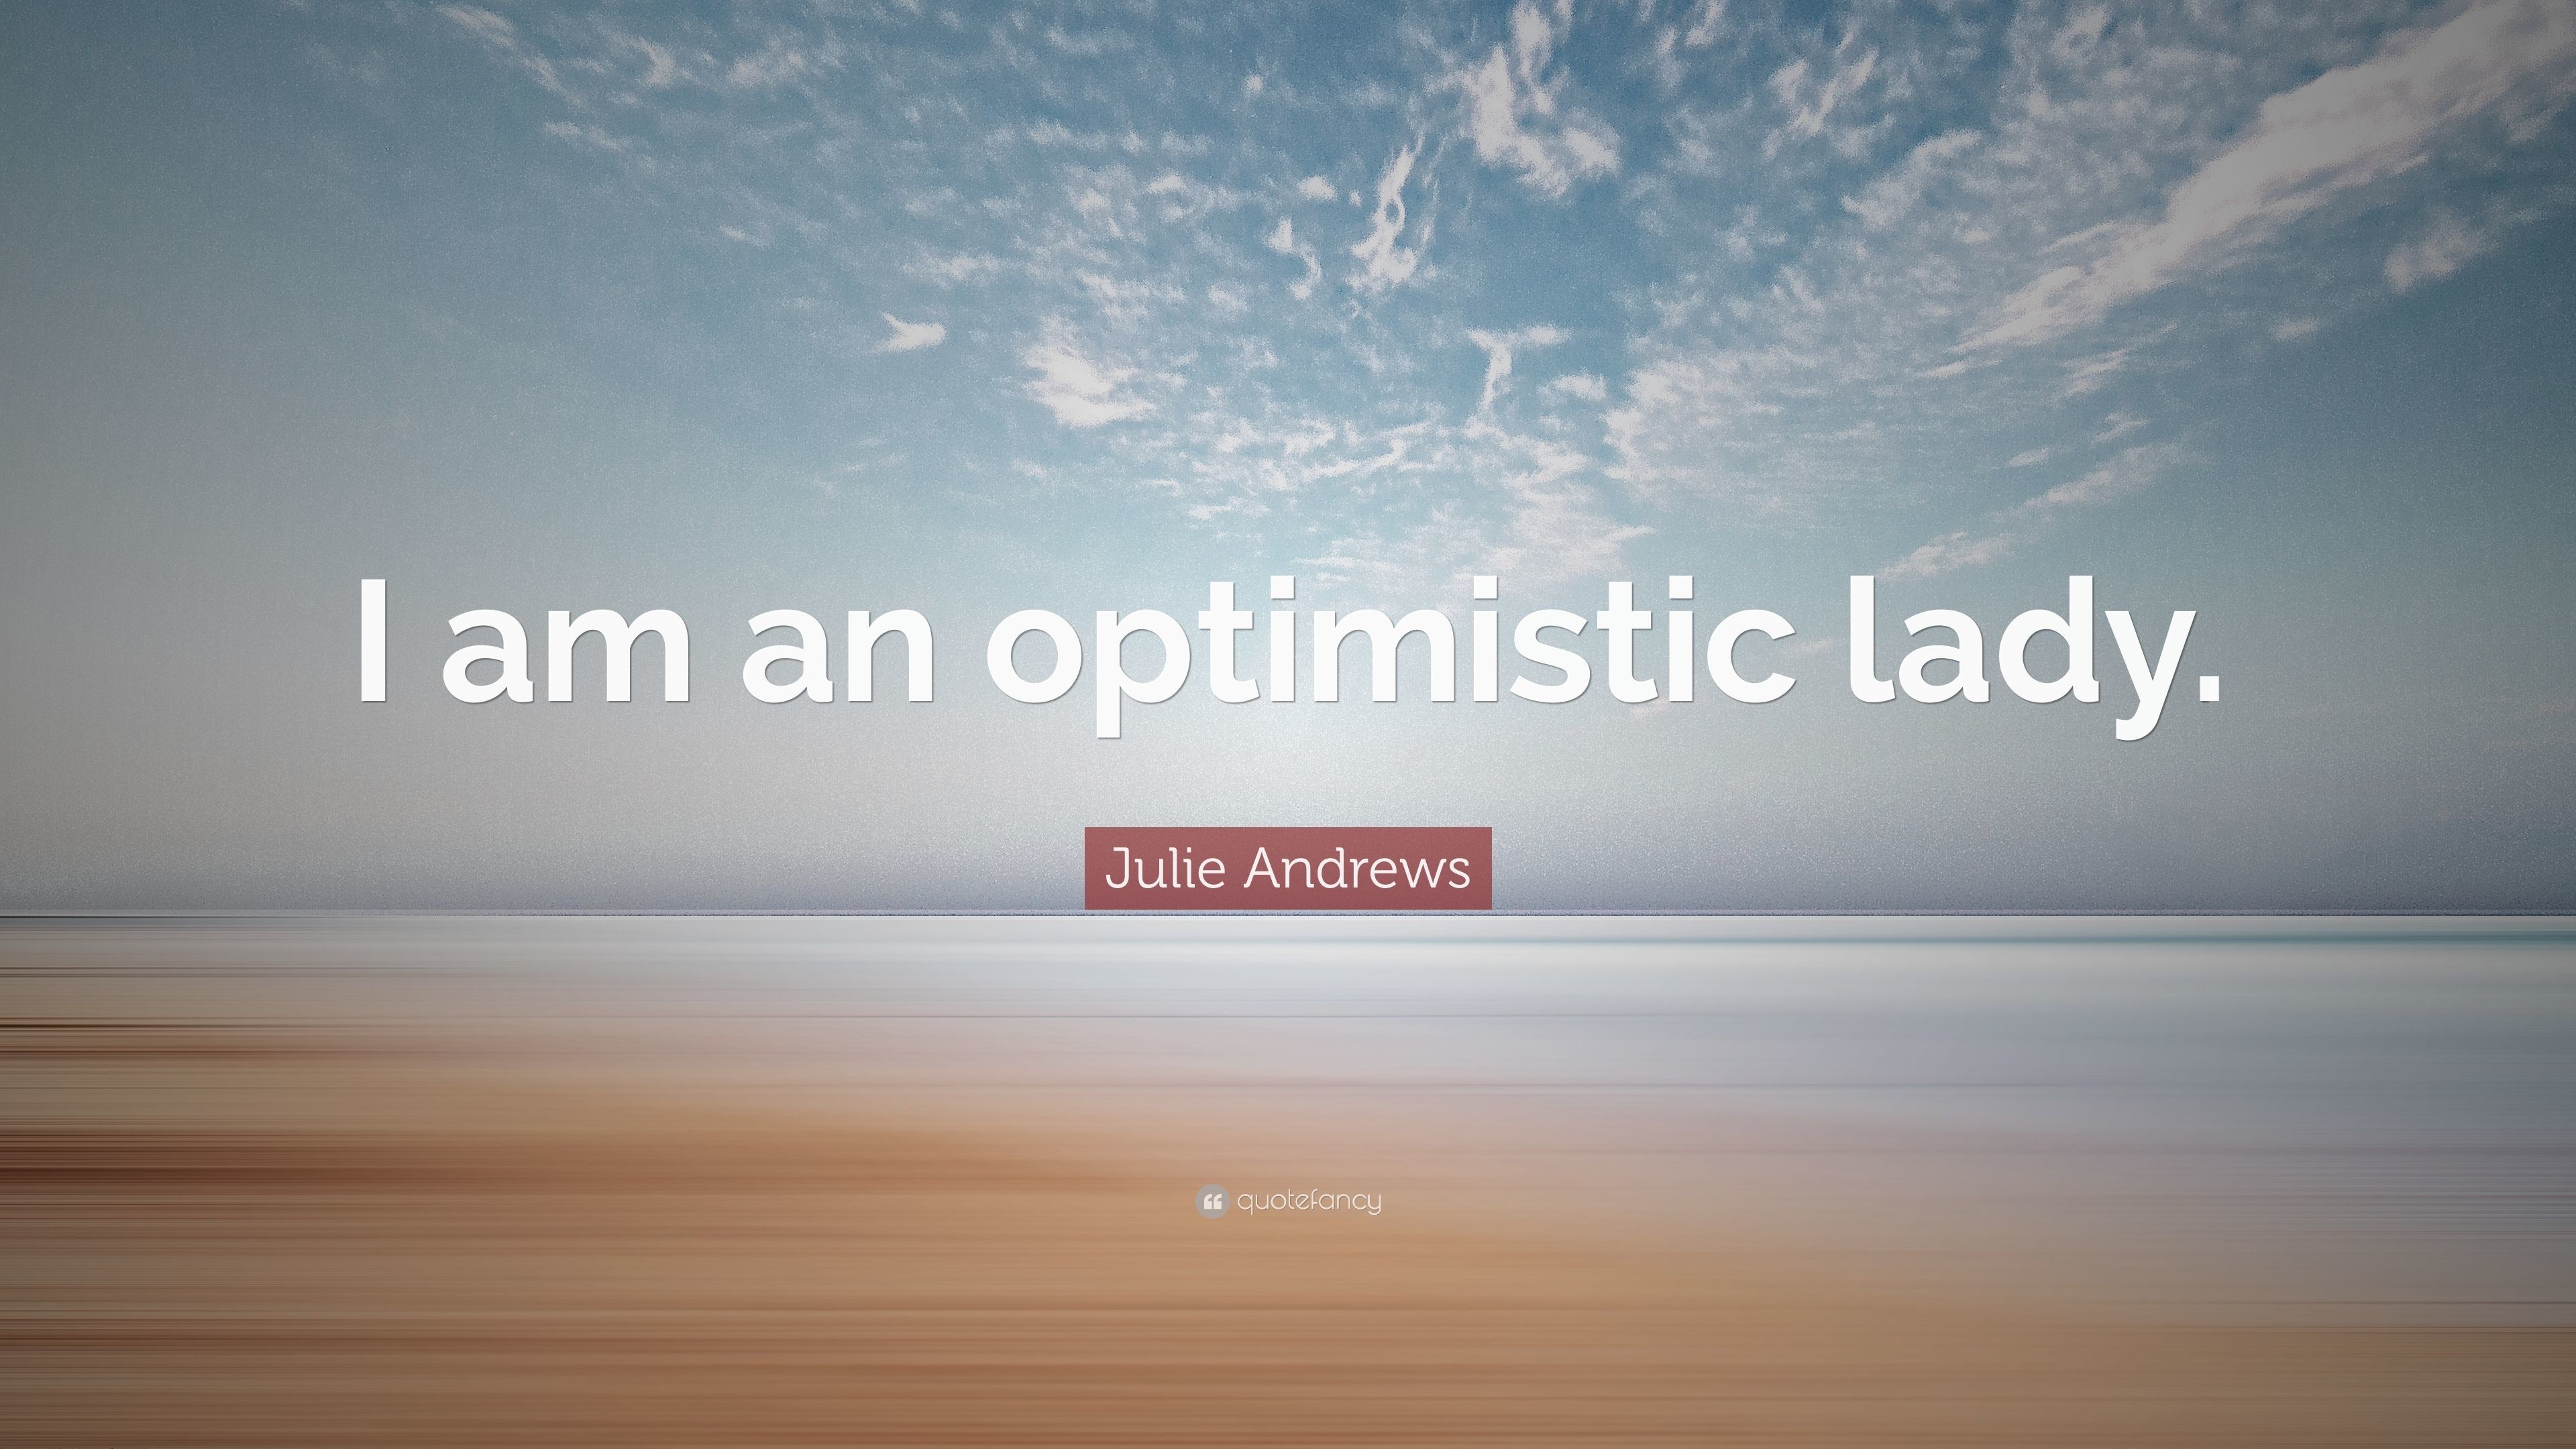 3840x2160 Julie Andrews Quote: “I am an optimistic lady.”